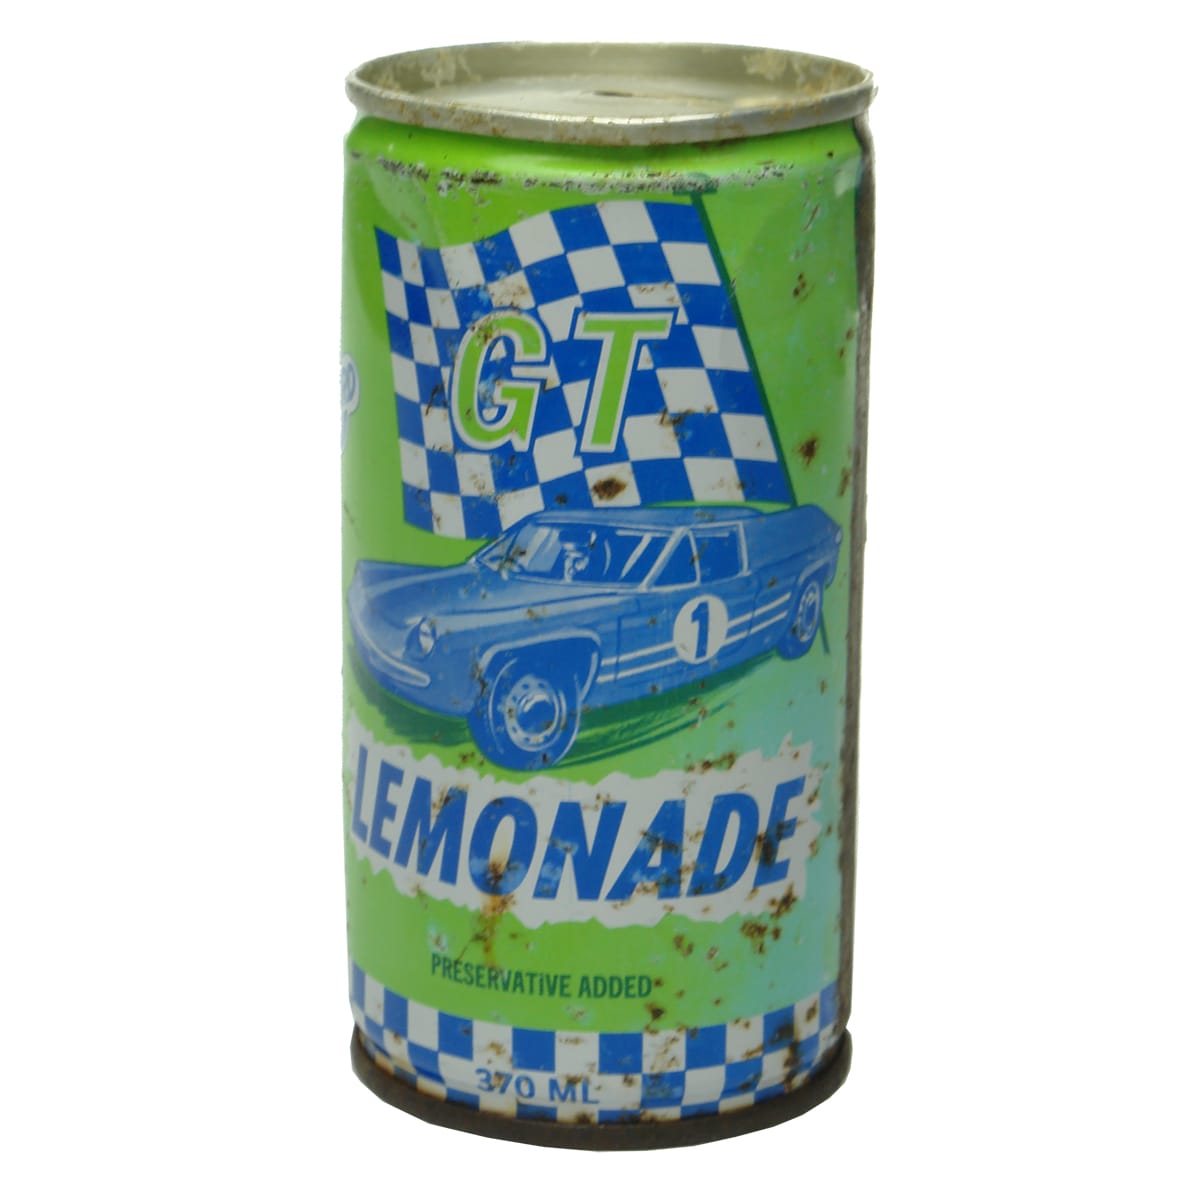 Soft Drink Can. GT Lemonade. Orford Sparkling Soft Drinks. Dads Herries Street, Toowoomba. (Queensland)